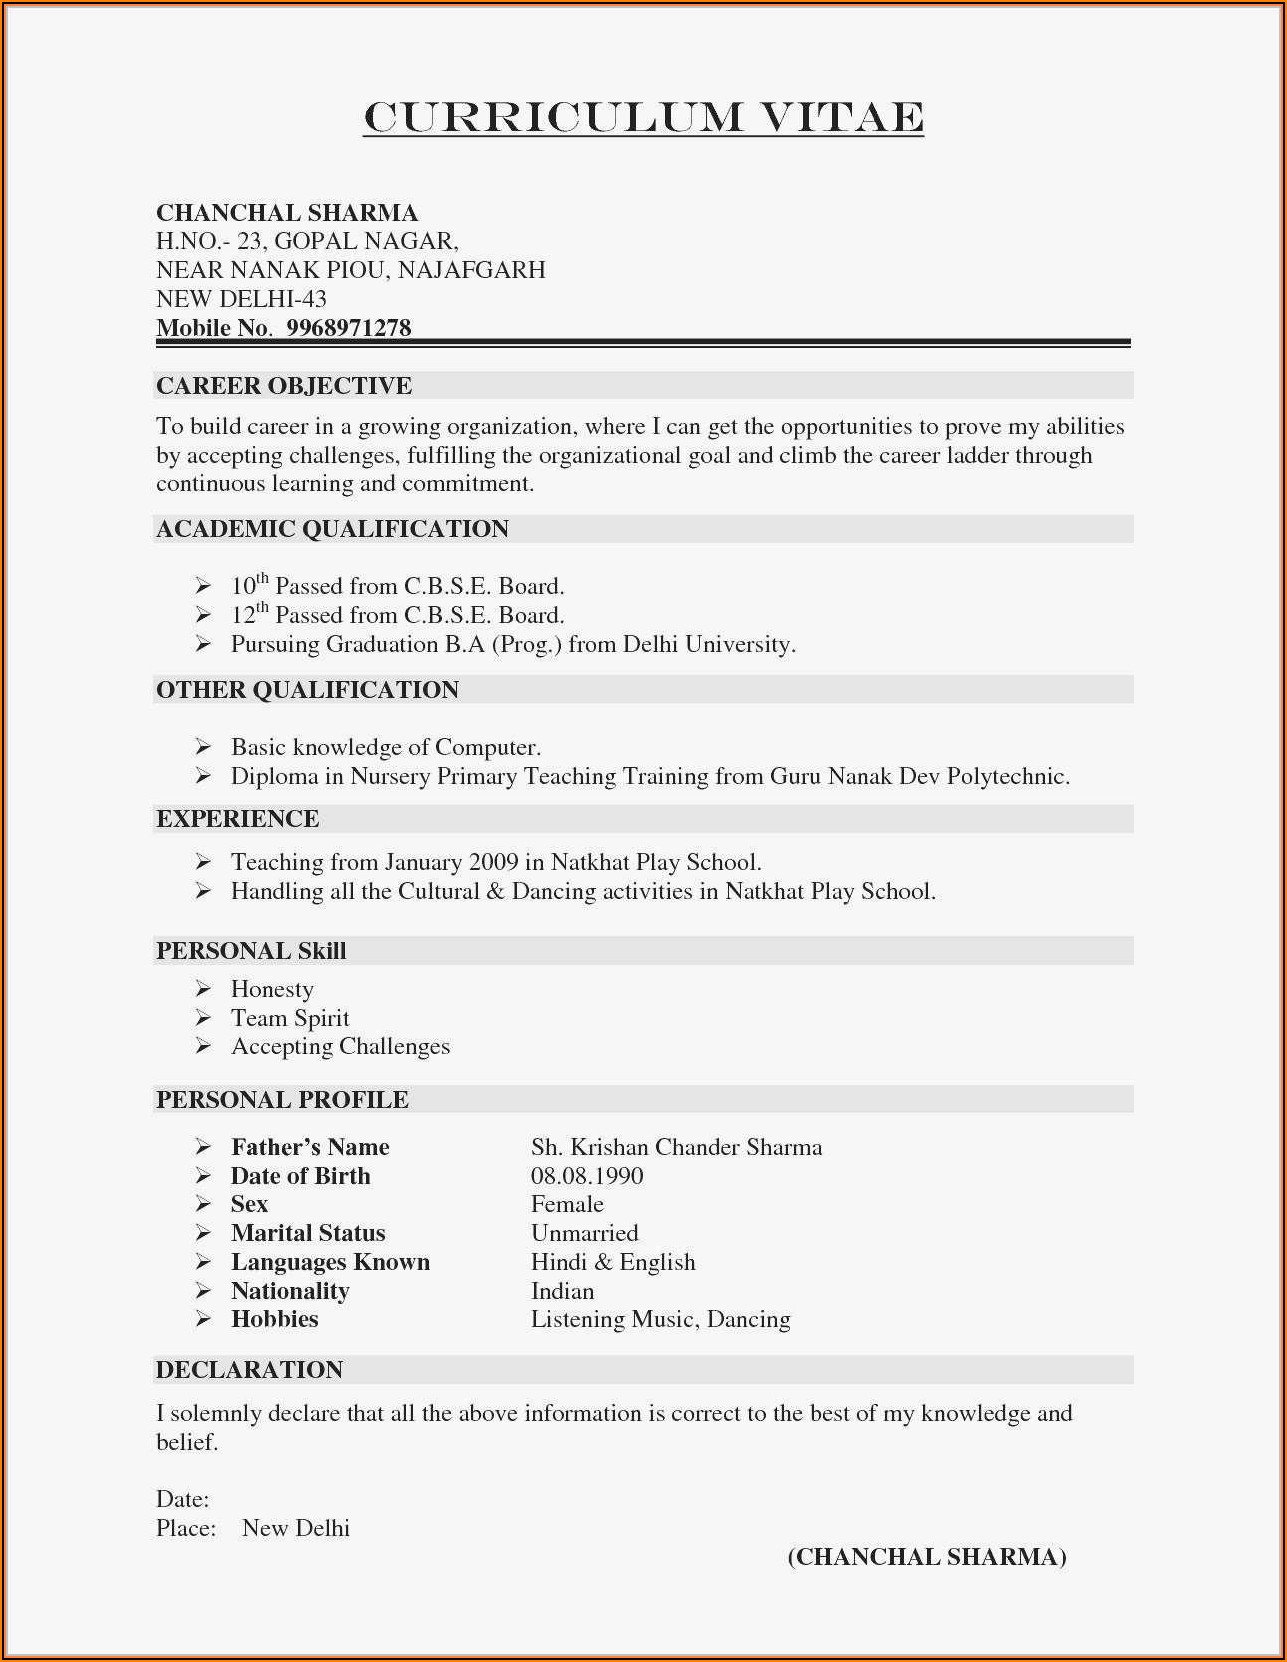 uline-4x2-label-template-template-2-resume-examples-pv9wxvbky7